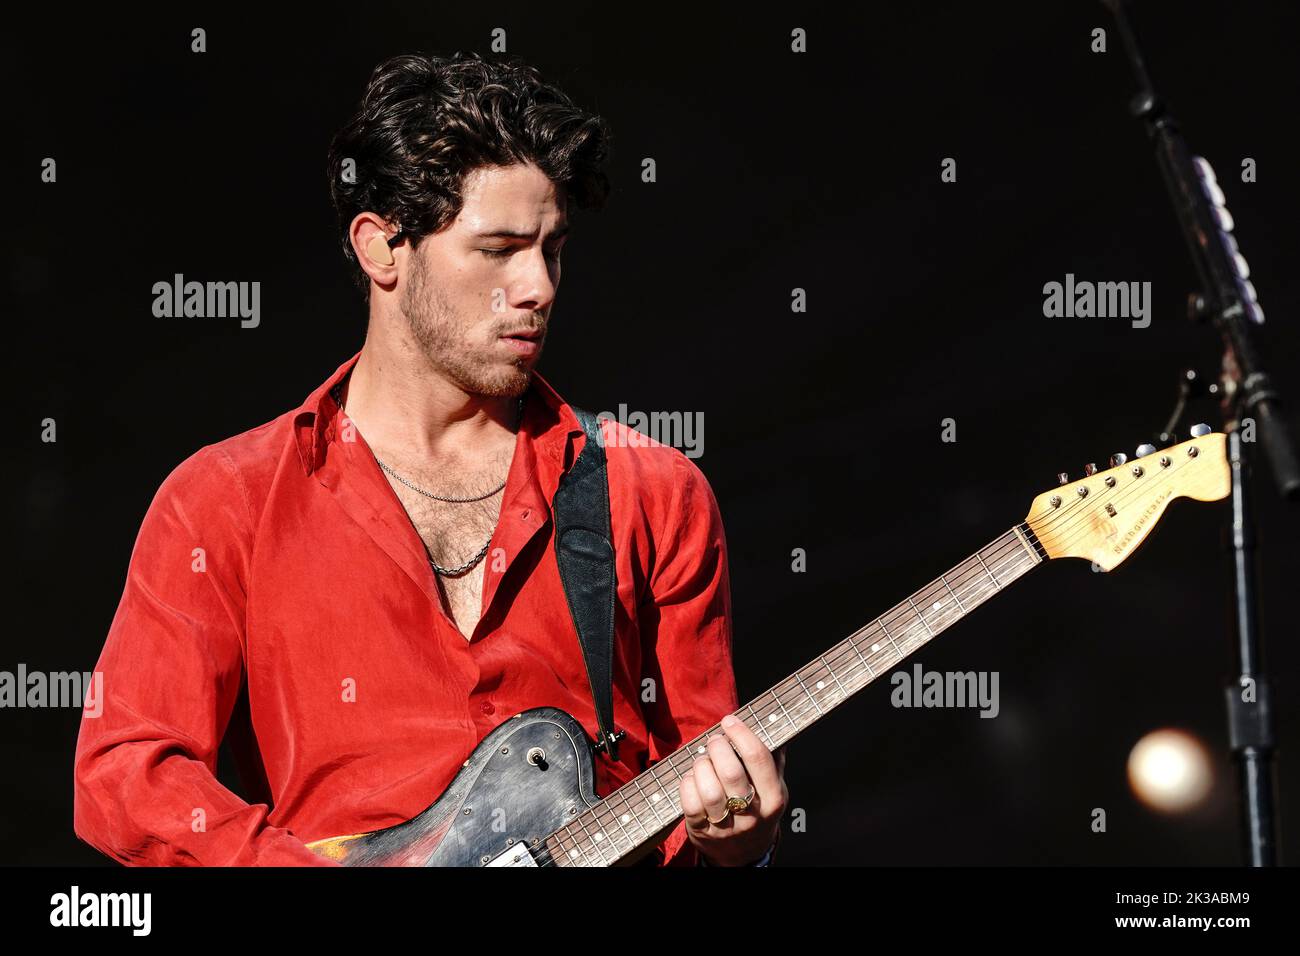 New York, NY - September 24, 2022: Jonas Brothers perform at Global Citizen Festival NYC in Central Park Stock Photo